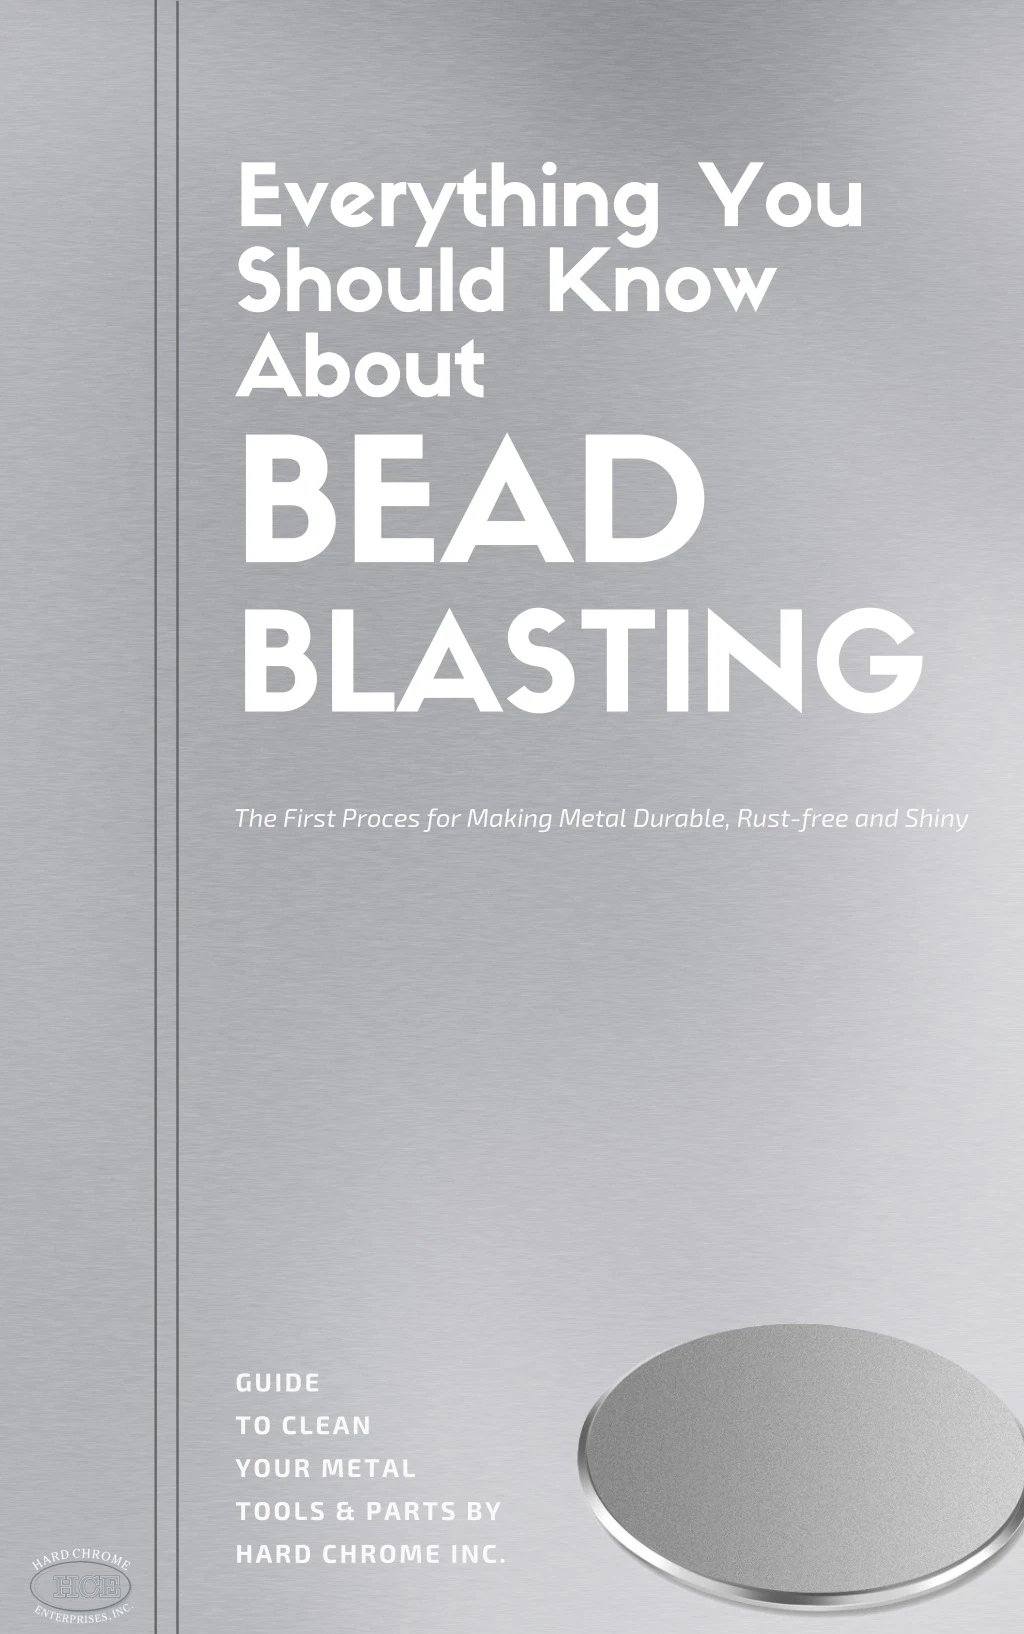 everything you should know about bead